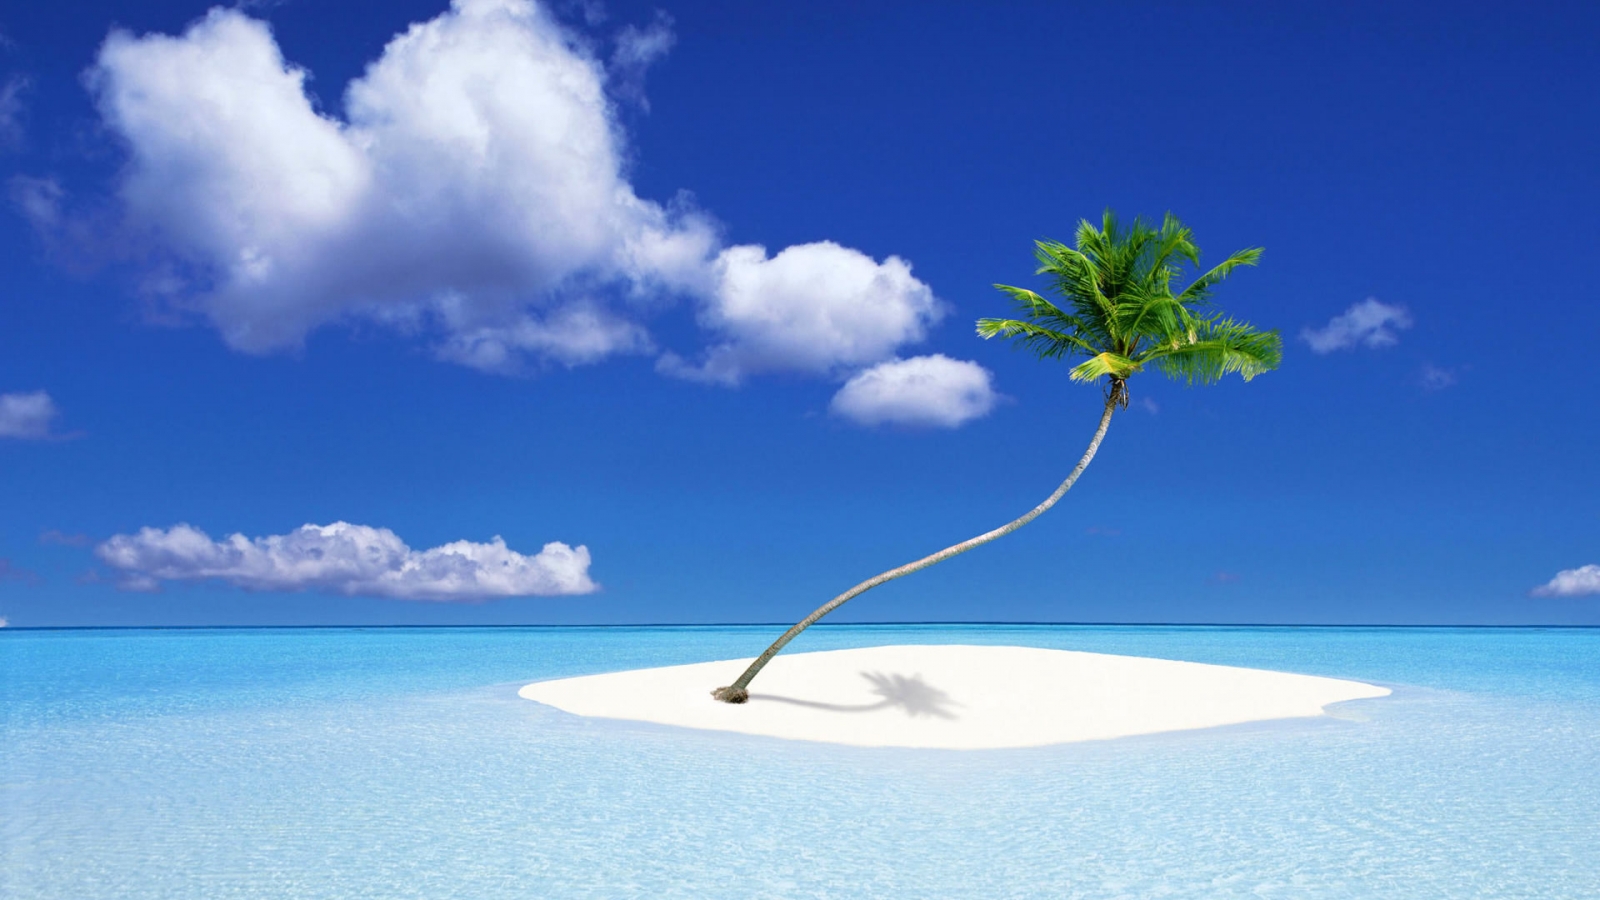 A Palm Tree Island for 1600 x 900 HDTV resolution